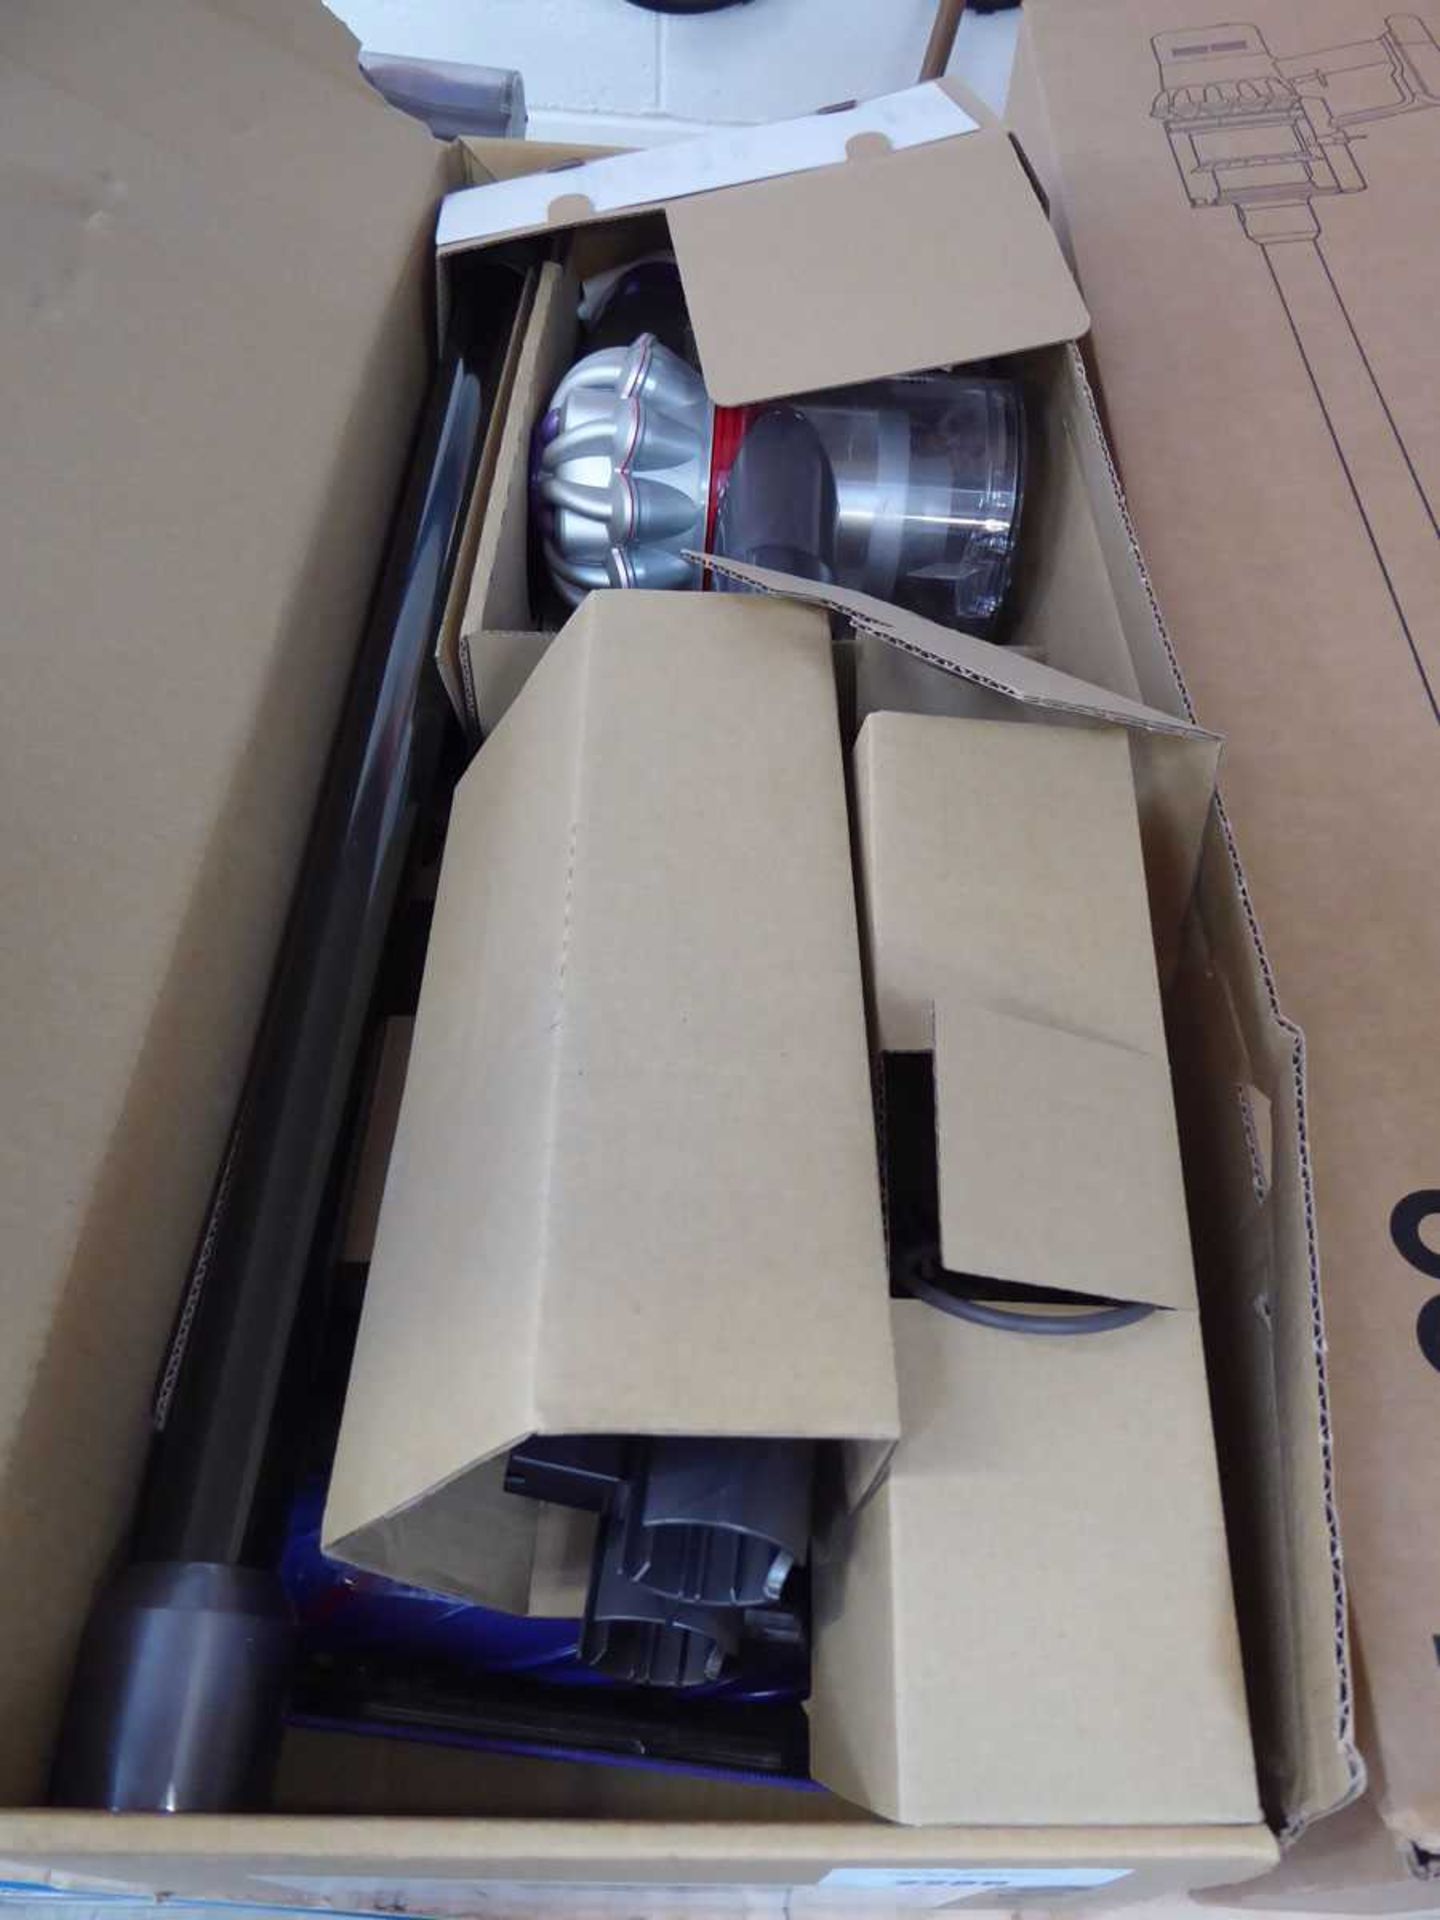 +VAT Dyson V8 cordless stick vacuum cleaner with charger, wall mount and accessories - Image 2 of 2